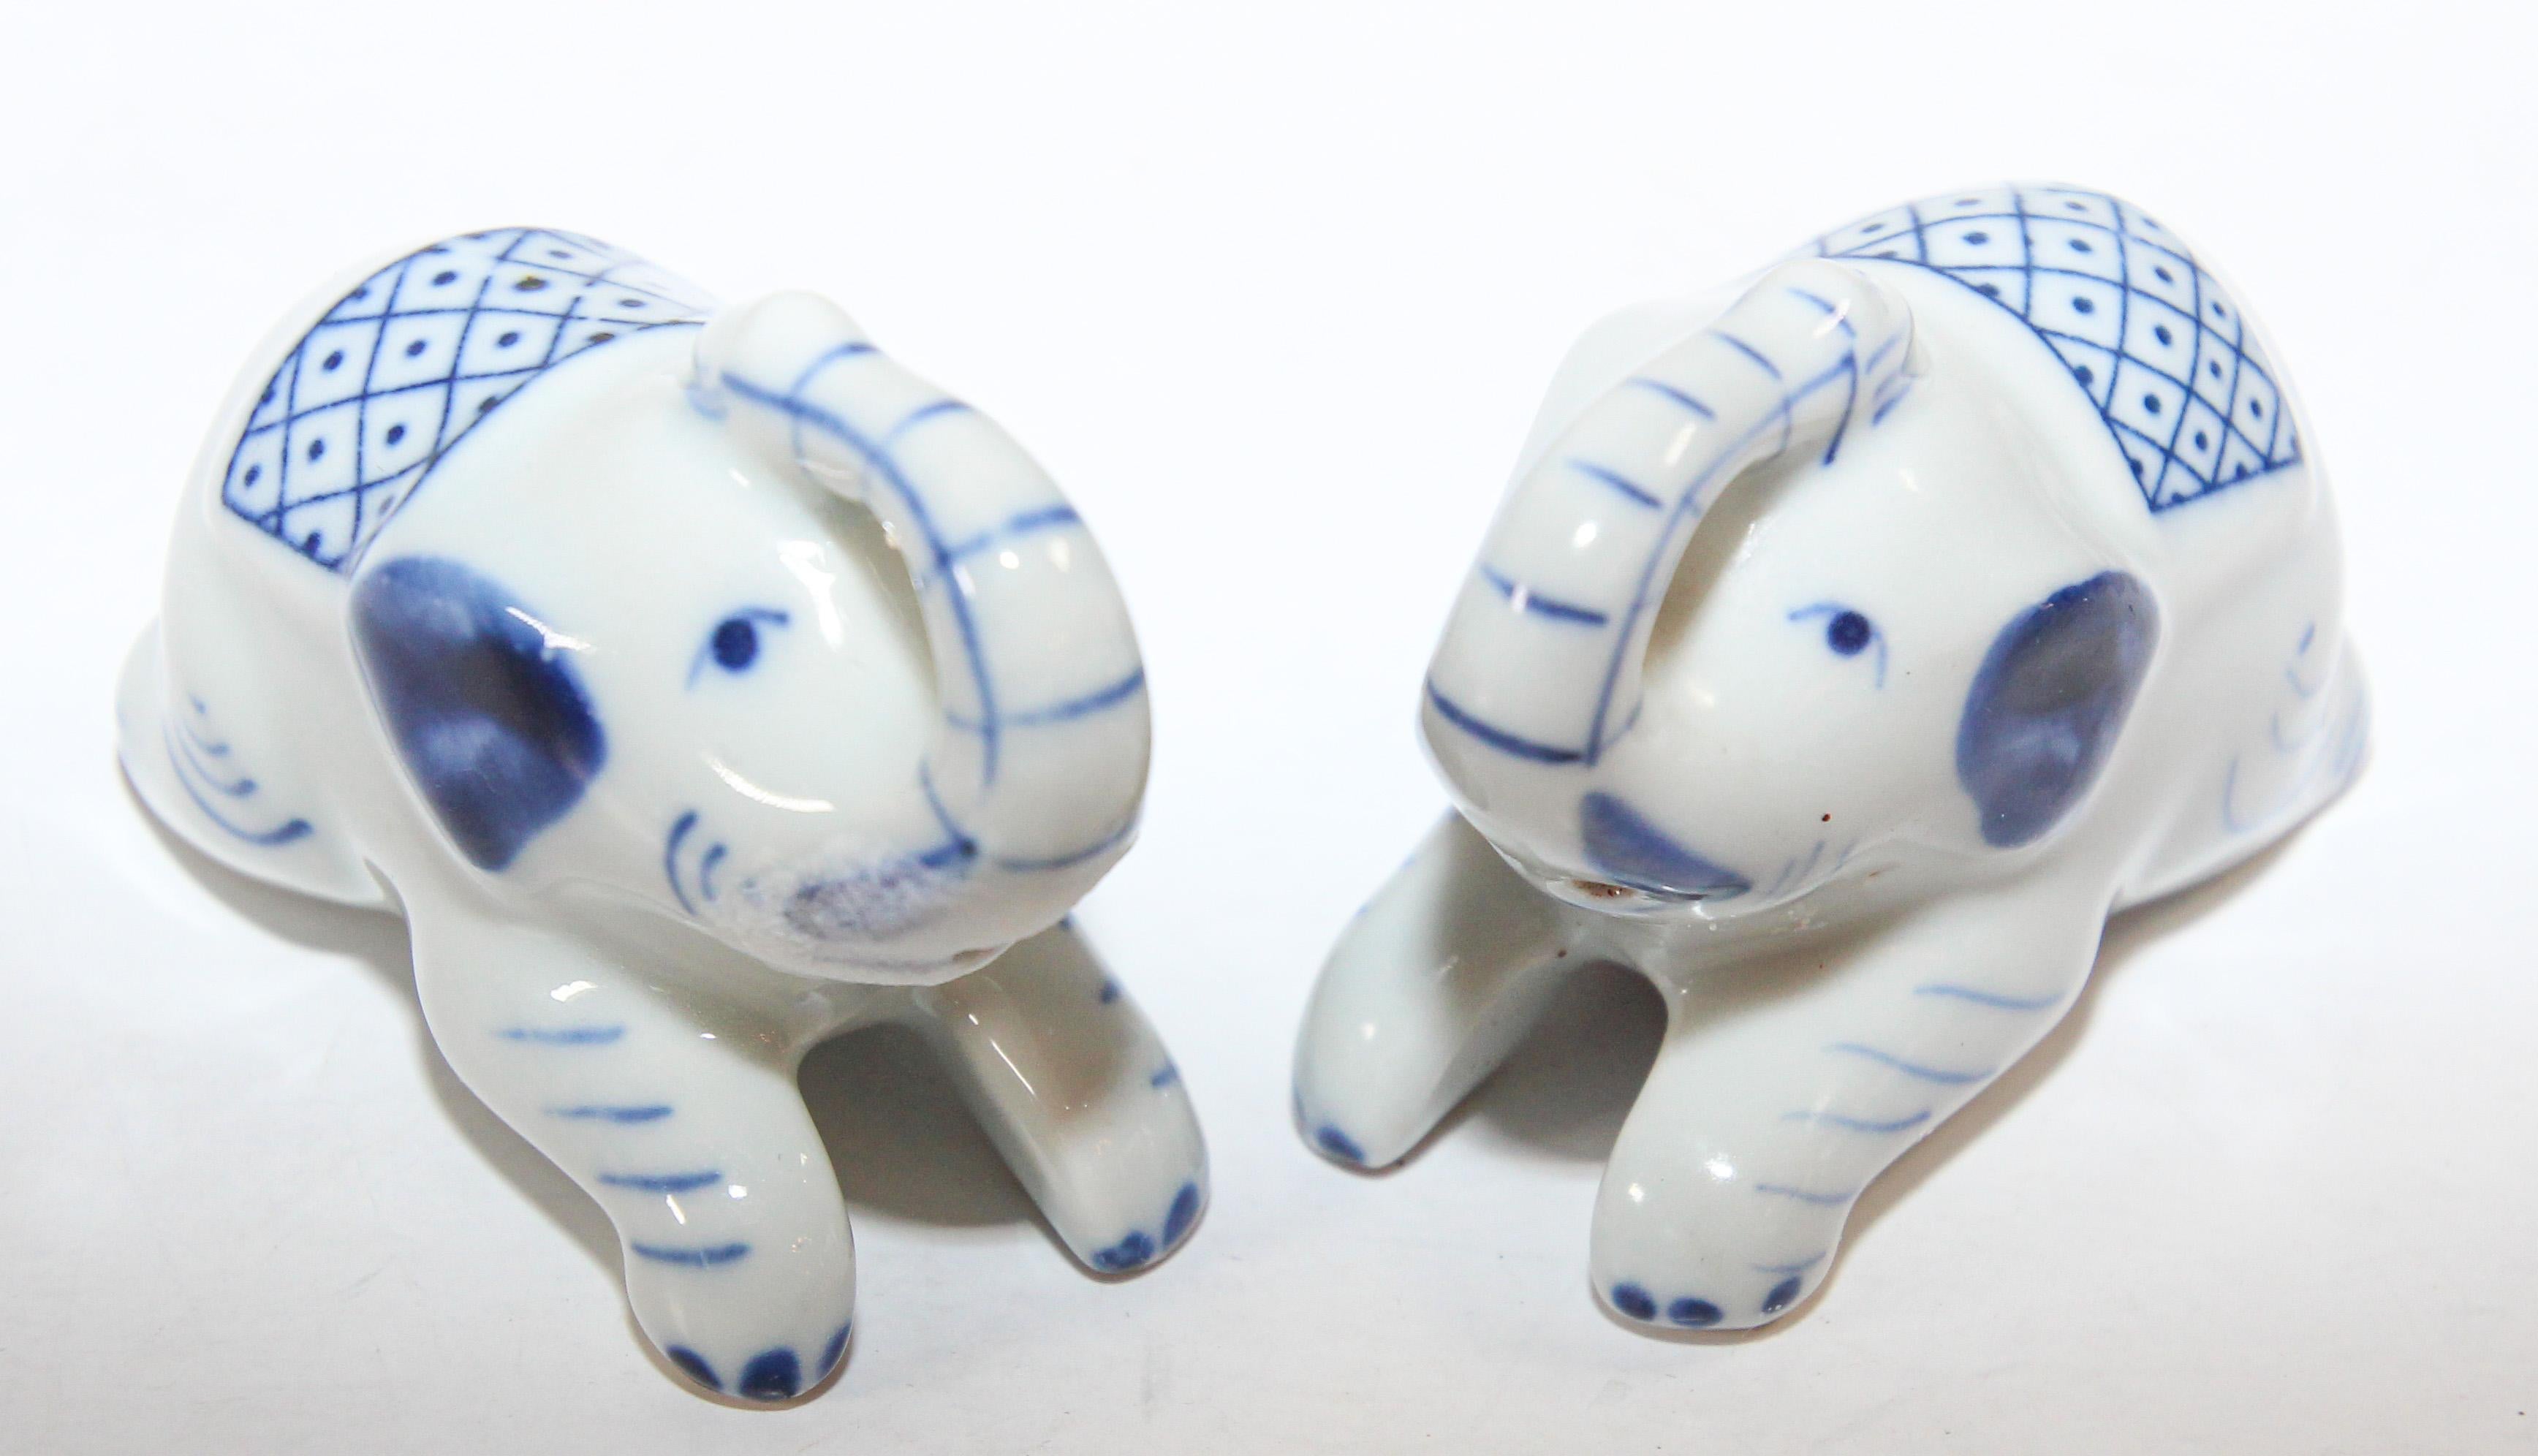 Asian Vintage Porcelain Elephants Salt and Pepper Shakers with Tray Collectible For Sale